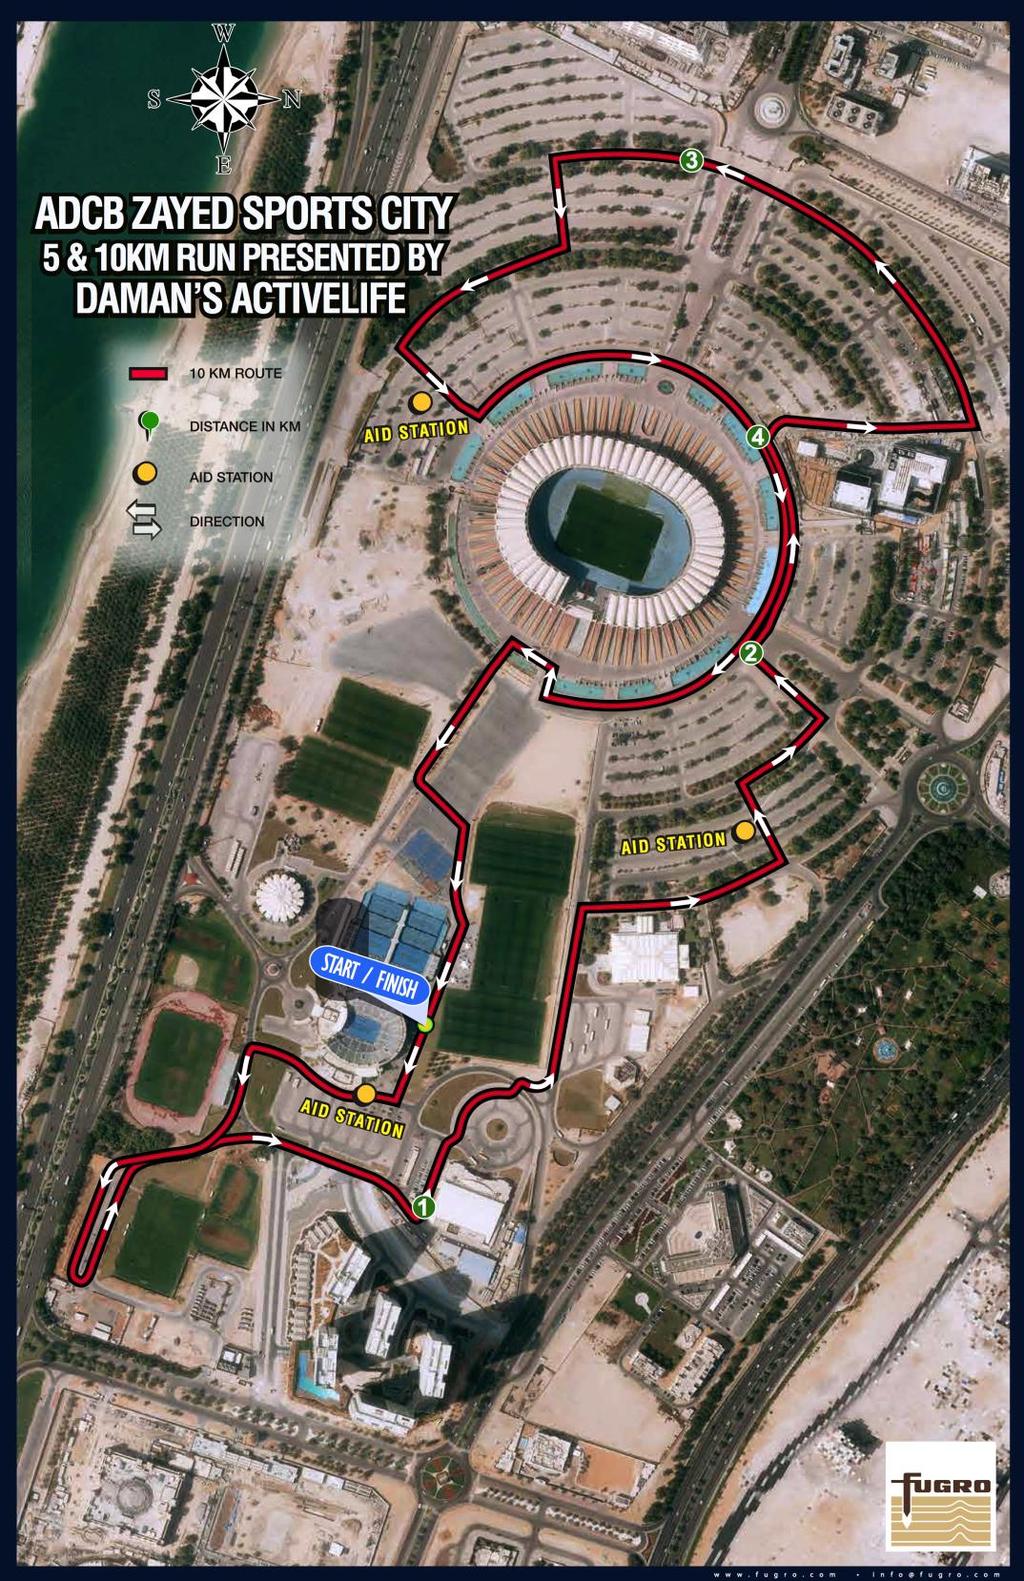 The Course The 10km course is a two lap (5km is single lap) run throughout Zayed Sports City and is clearly marked and marshalled.